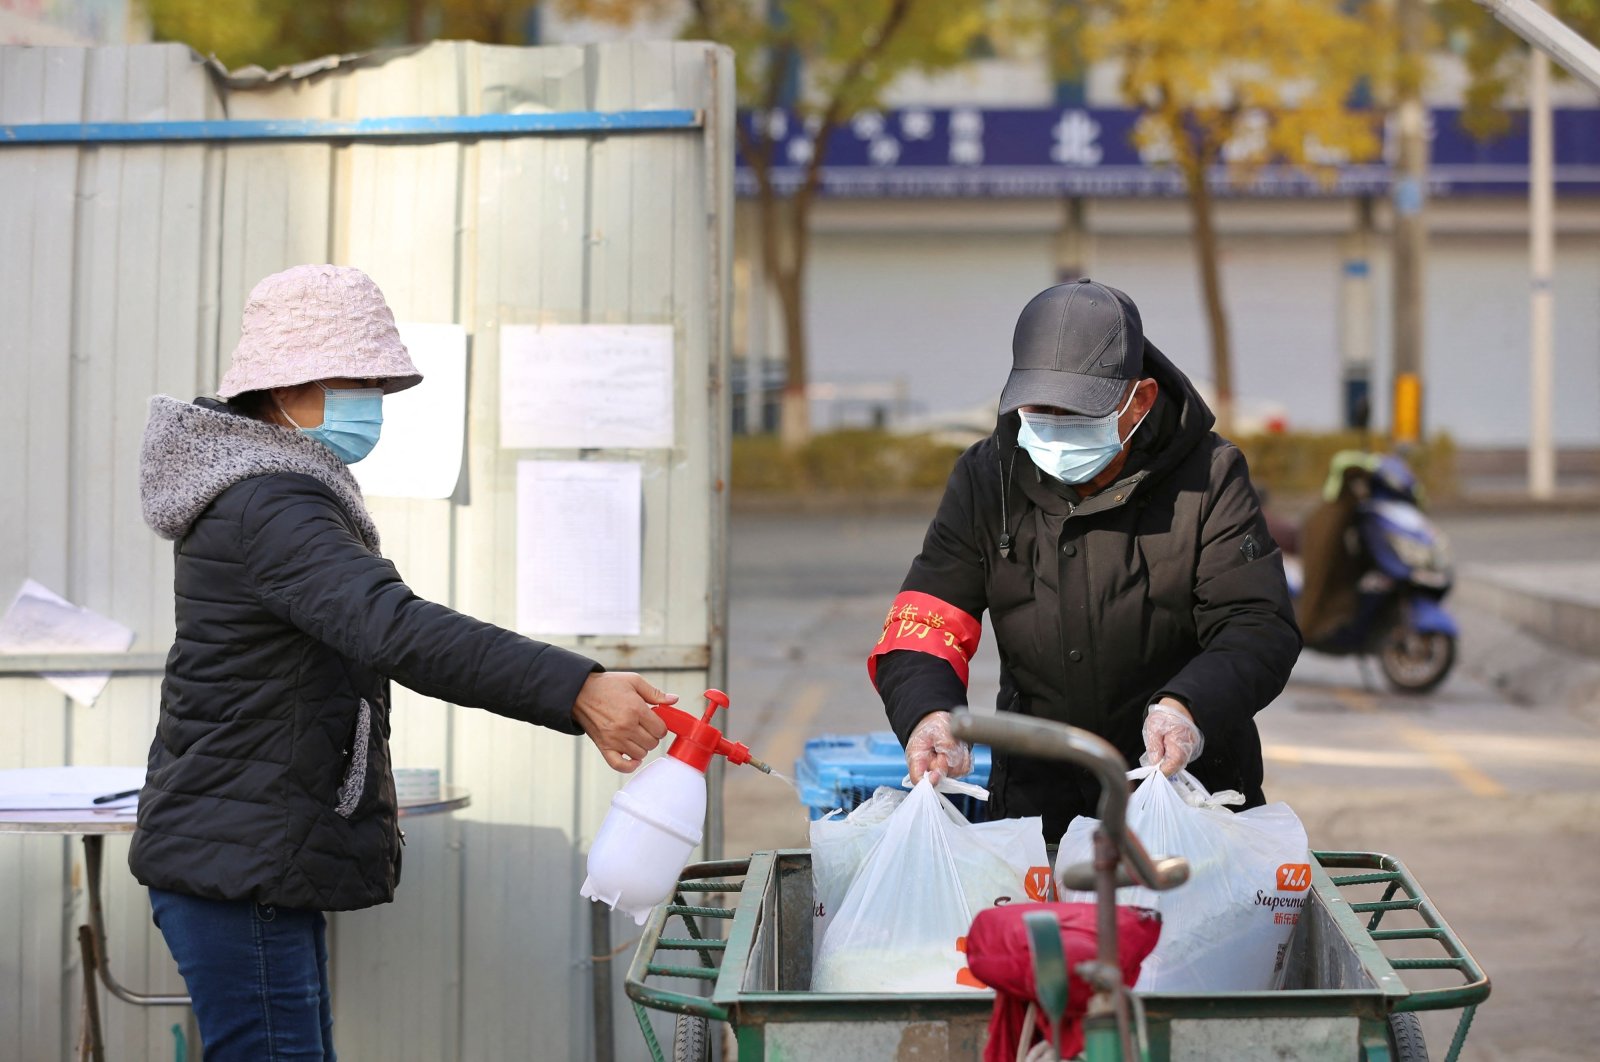 A volunteer spraying disinfectant on bags containing food that will be distributed to residents at a restricted residential area due to the spread of COVID-19 in Zhangye, northwestern Gansu province, in China, Oct. 31, 2021. (AFP Photo)